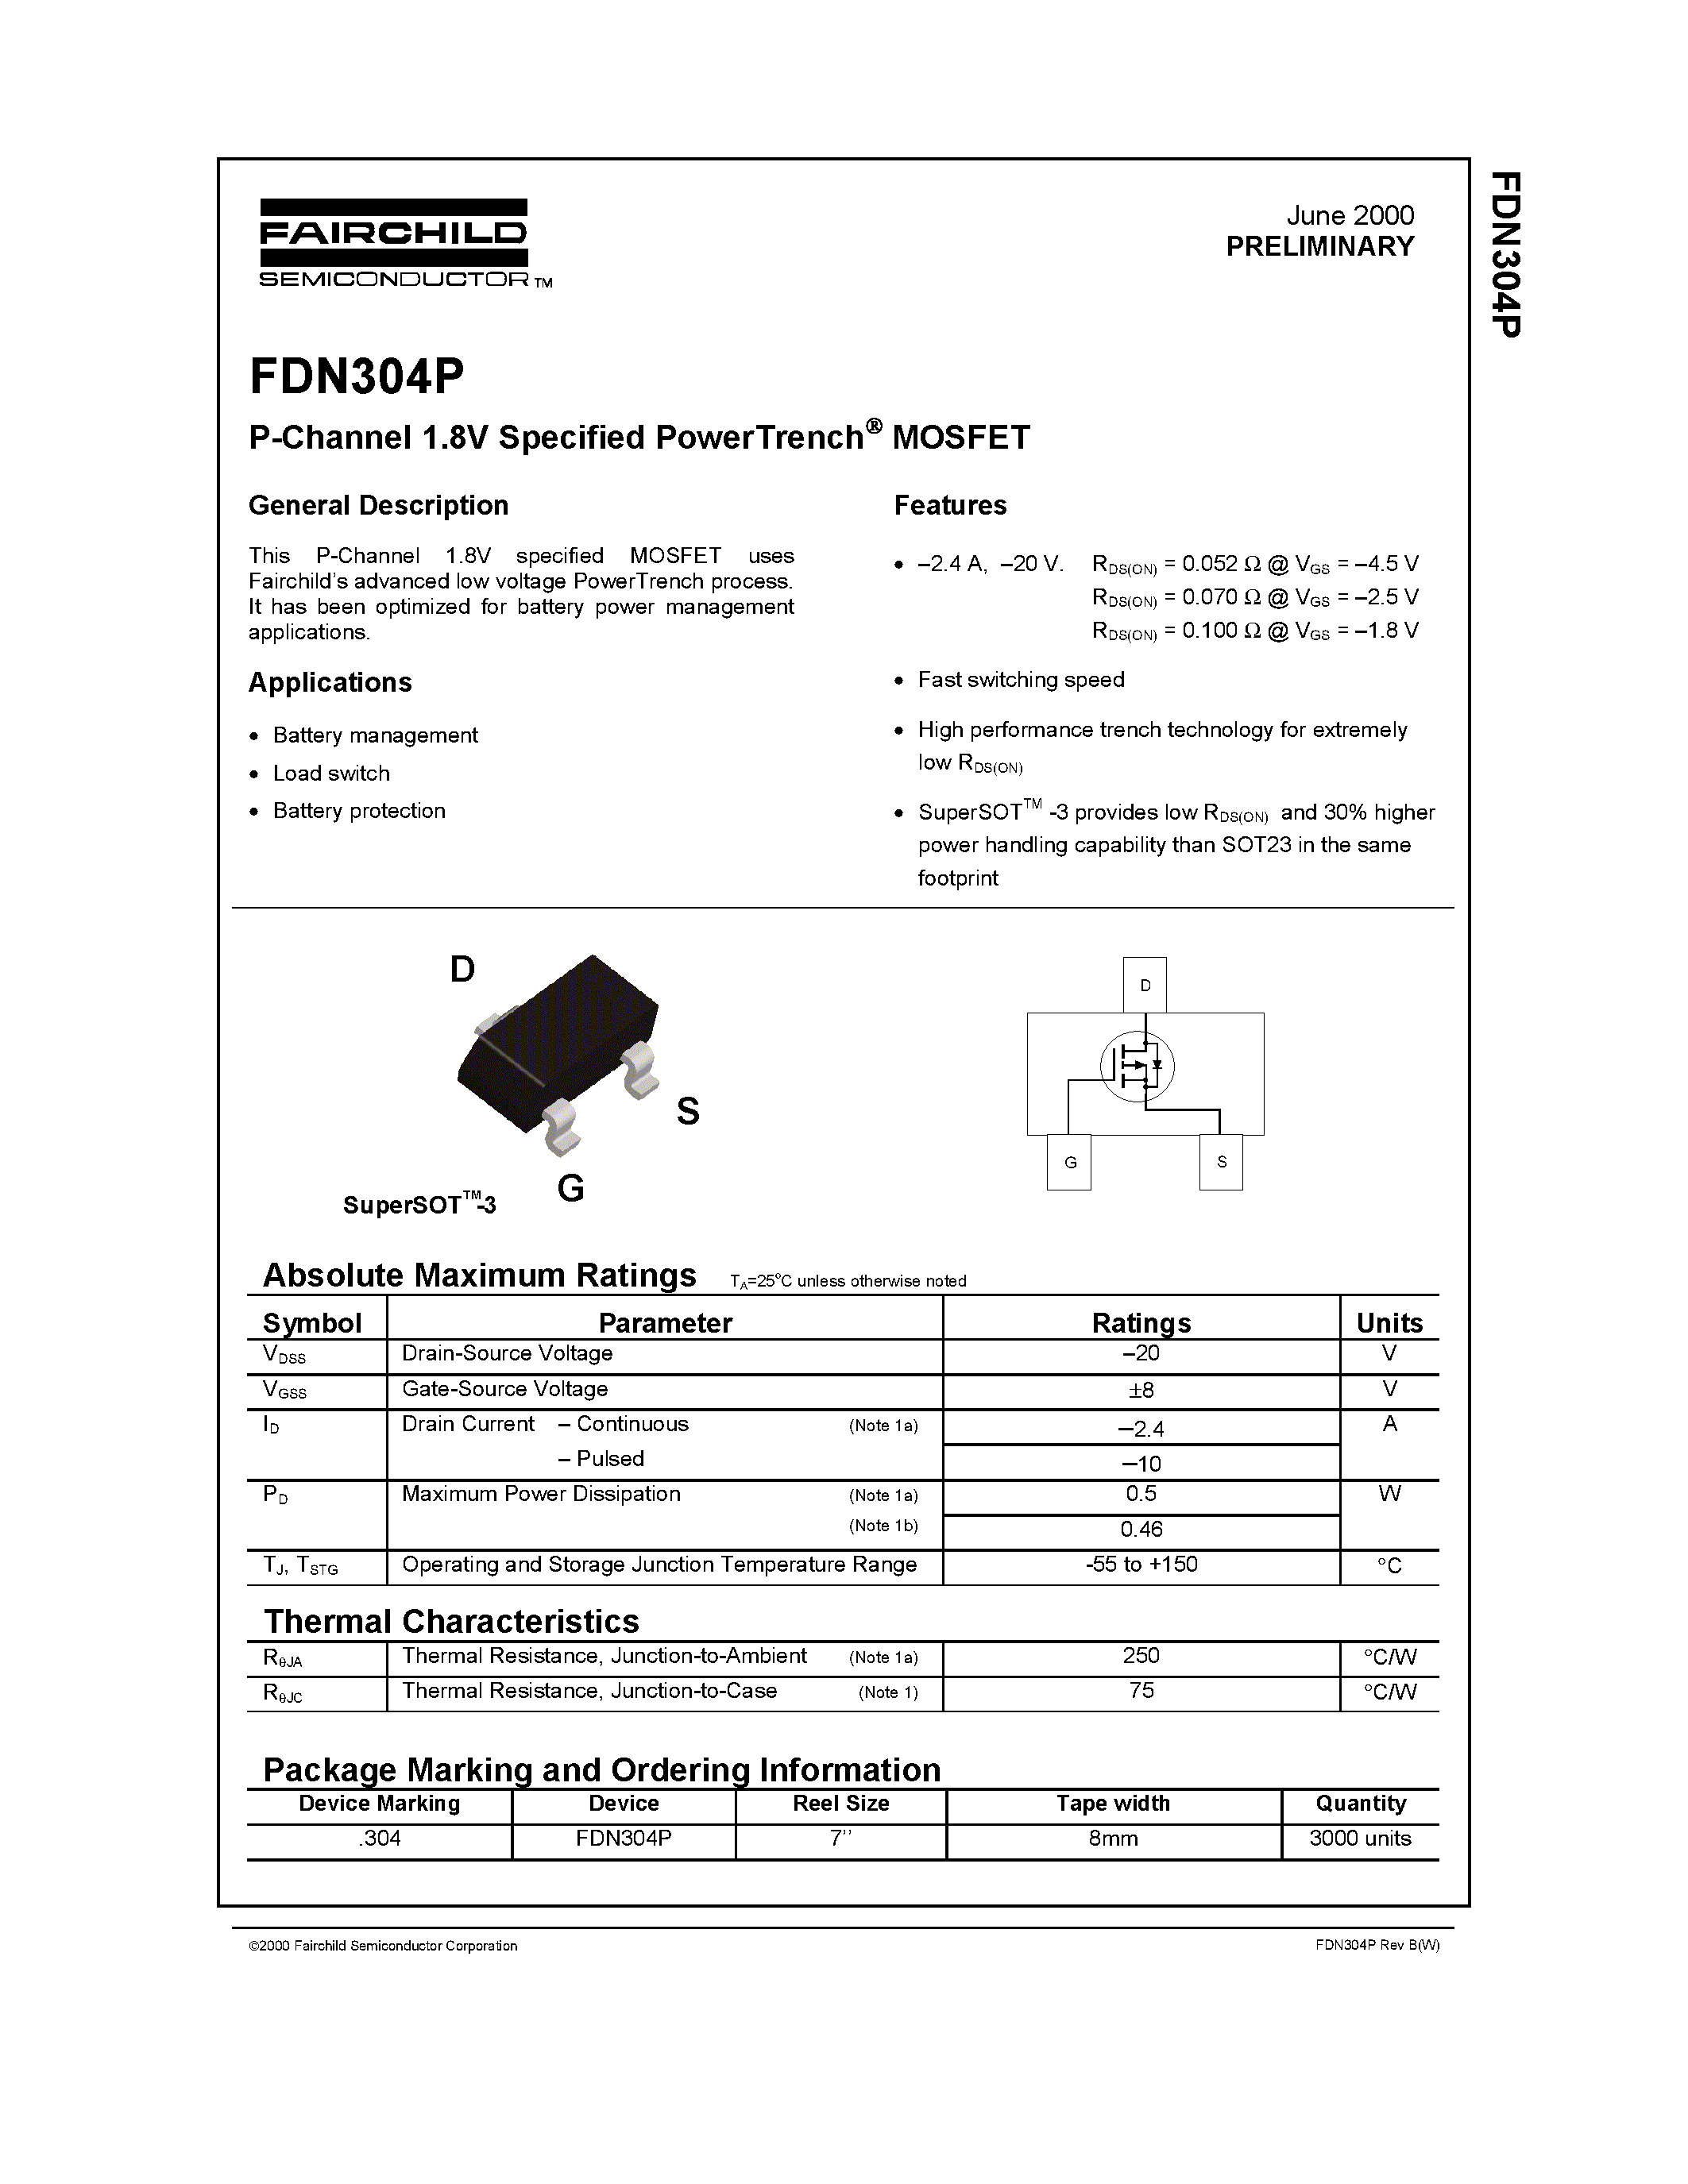 Даташит FDN304P - P-Channel 1.8V Specified PowerTrench MOSFET страница 1